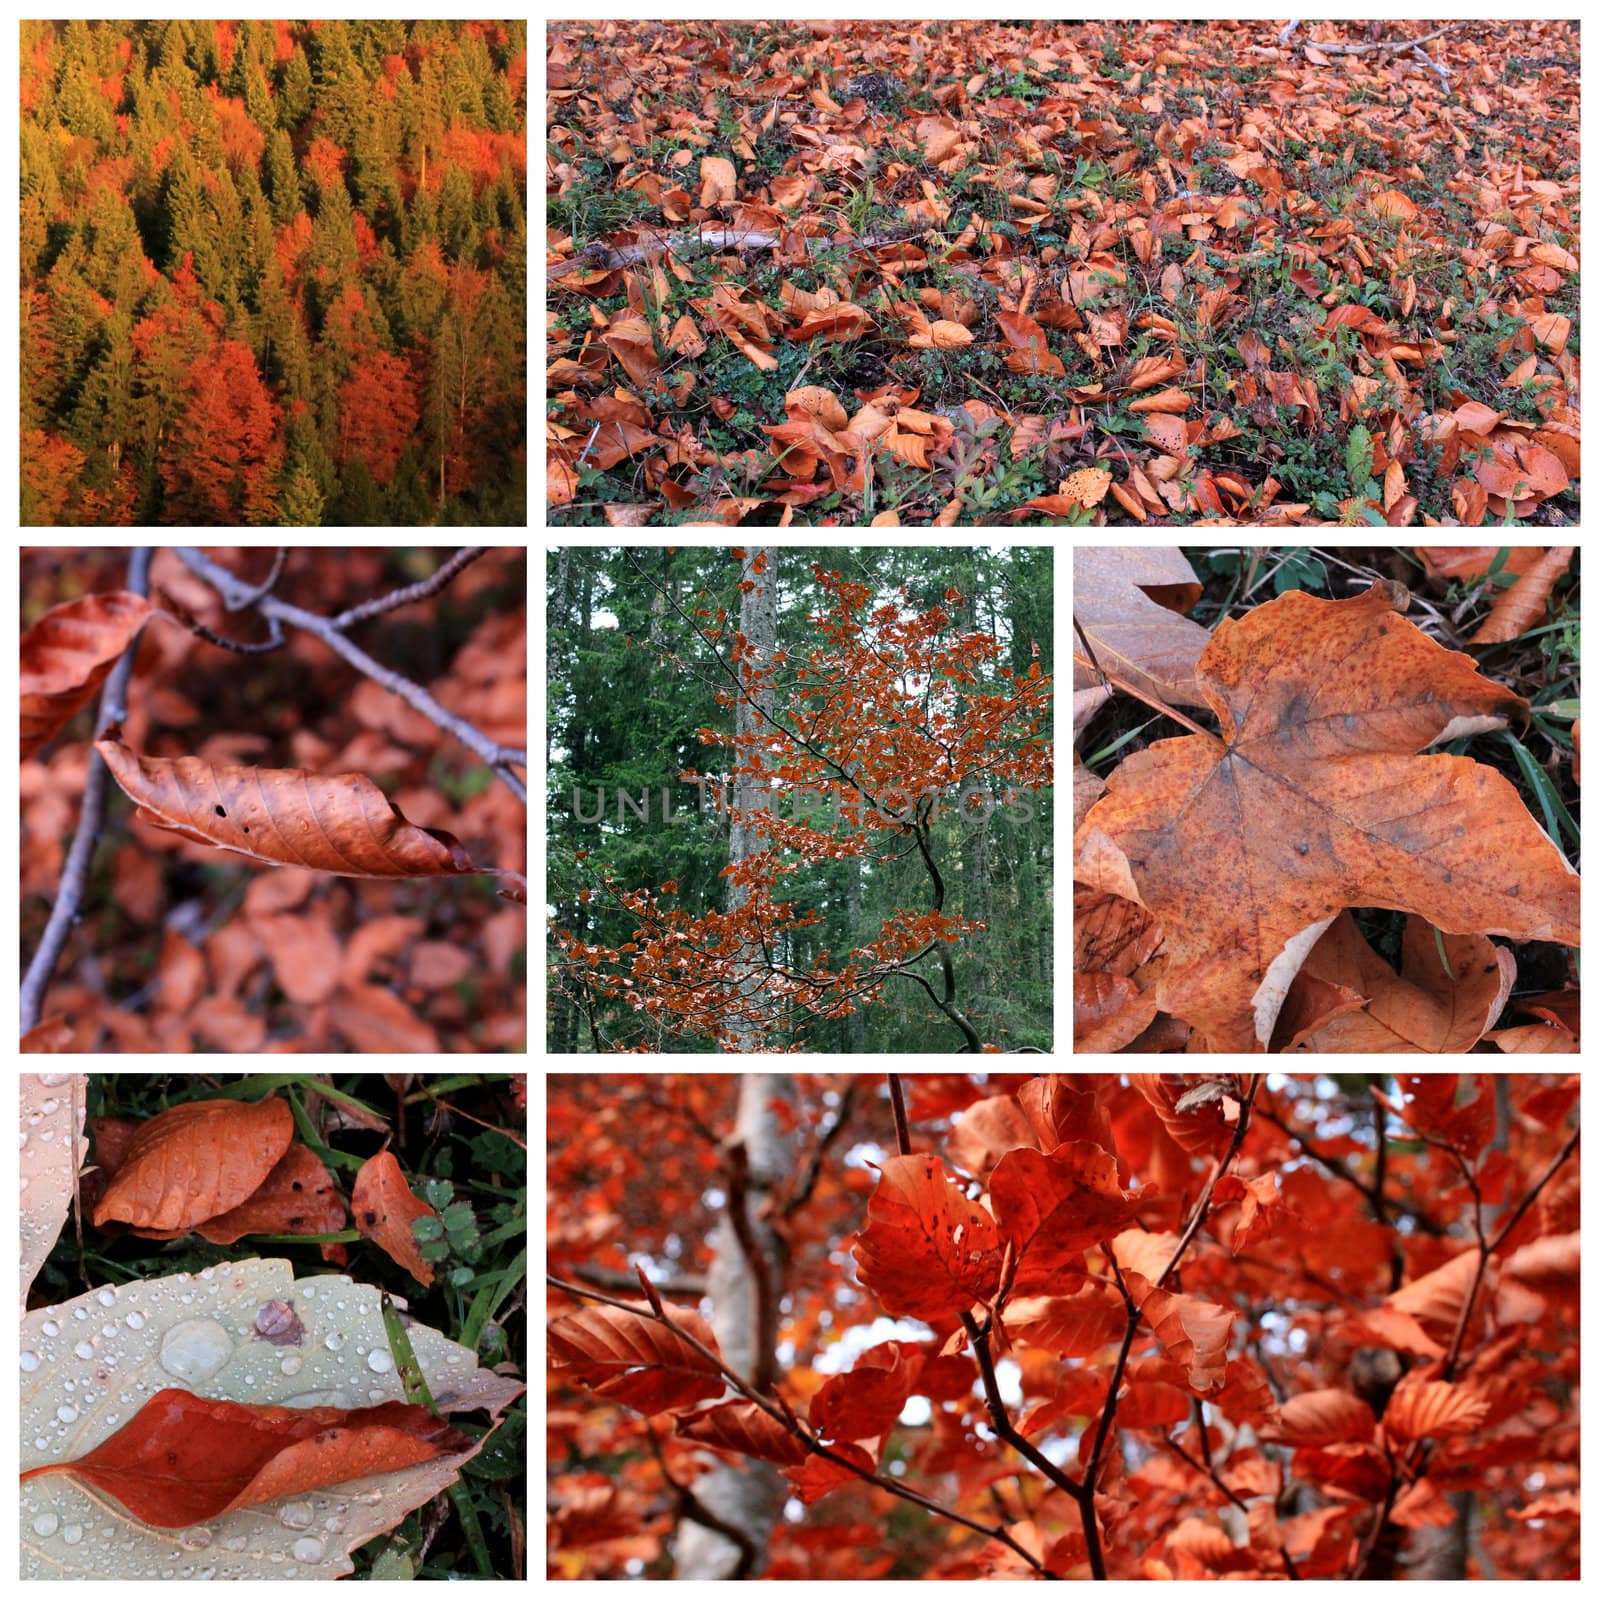 Collage of many red leaves in autumn season